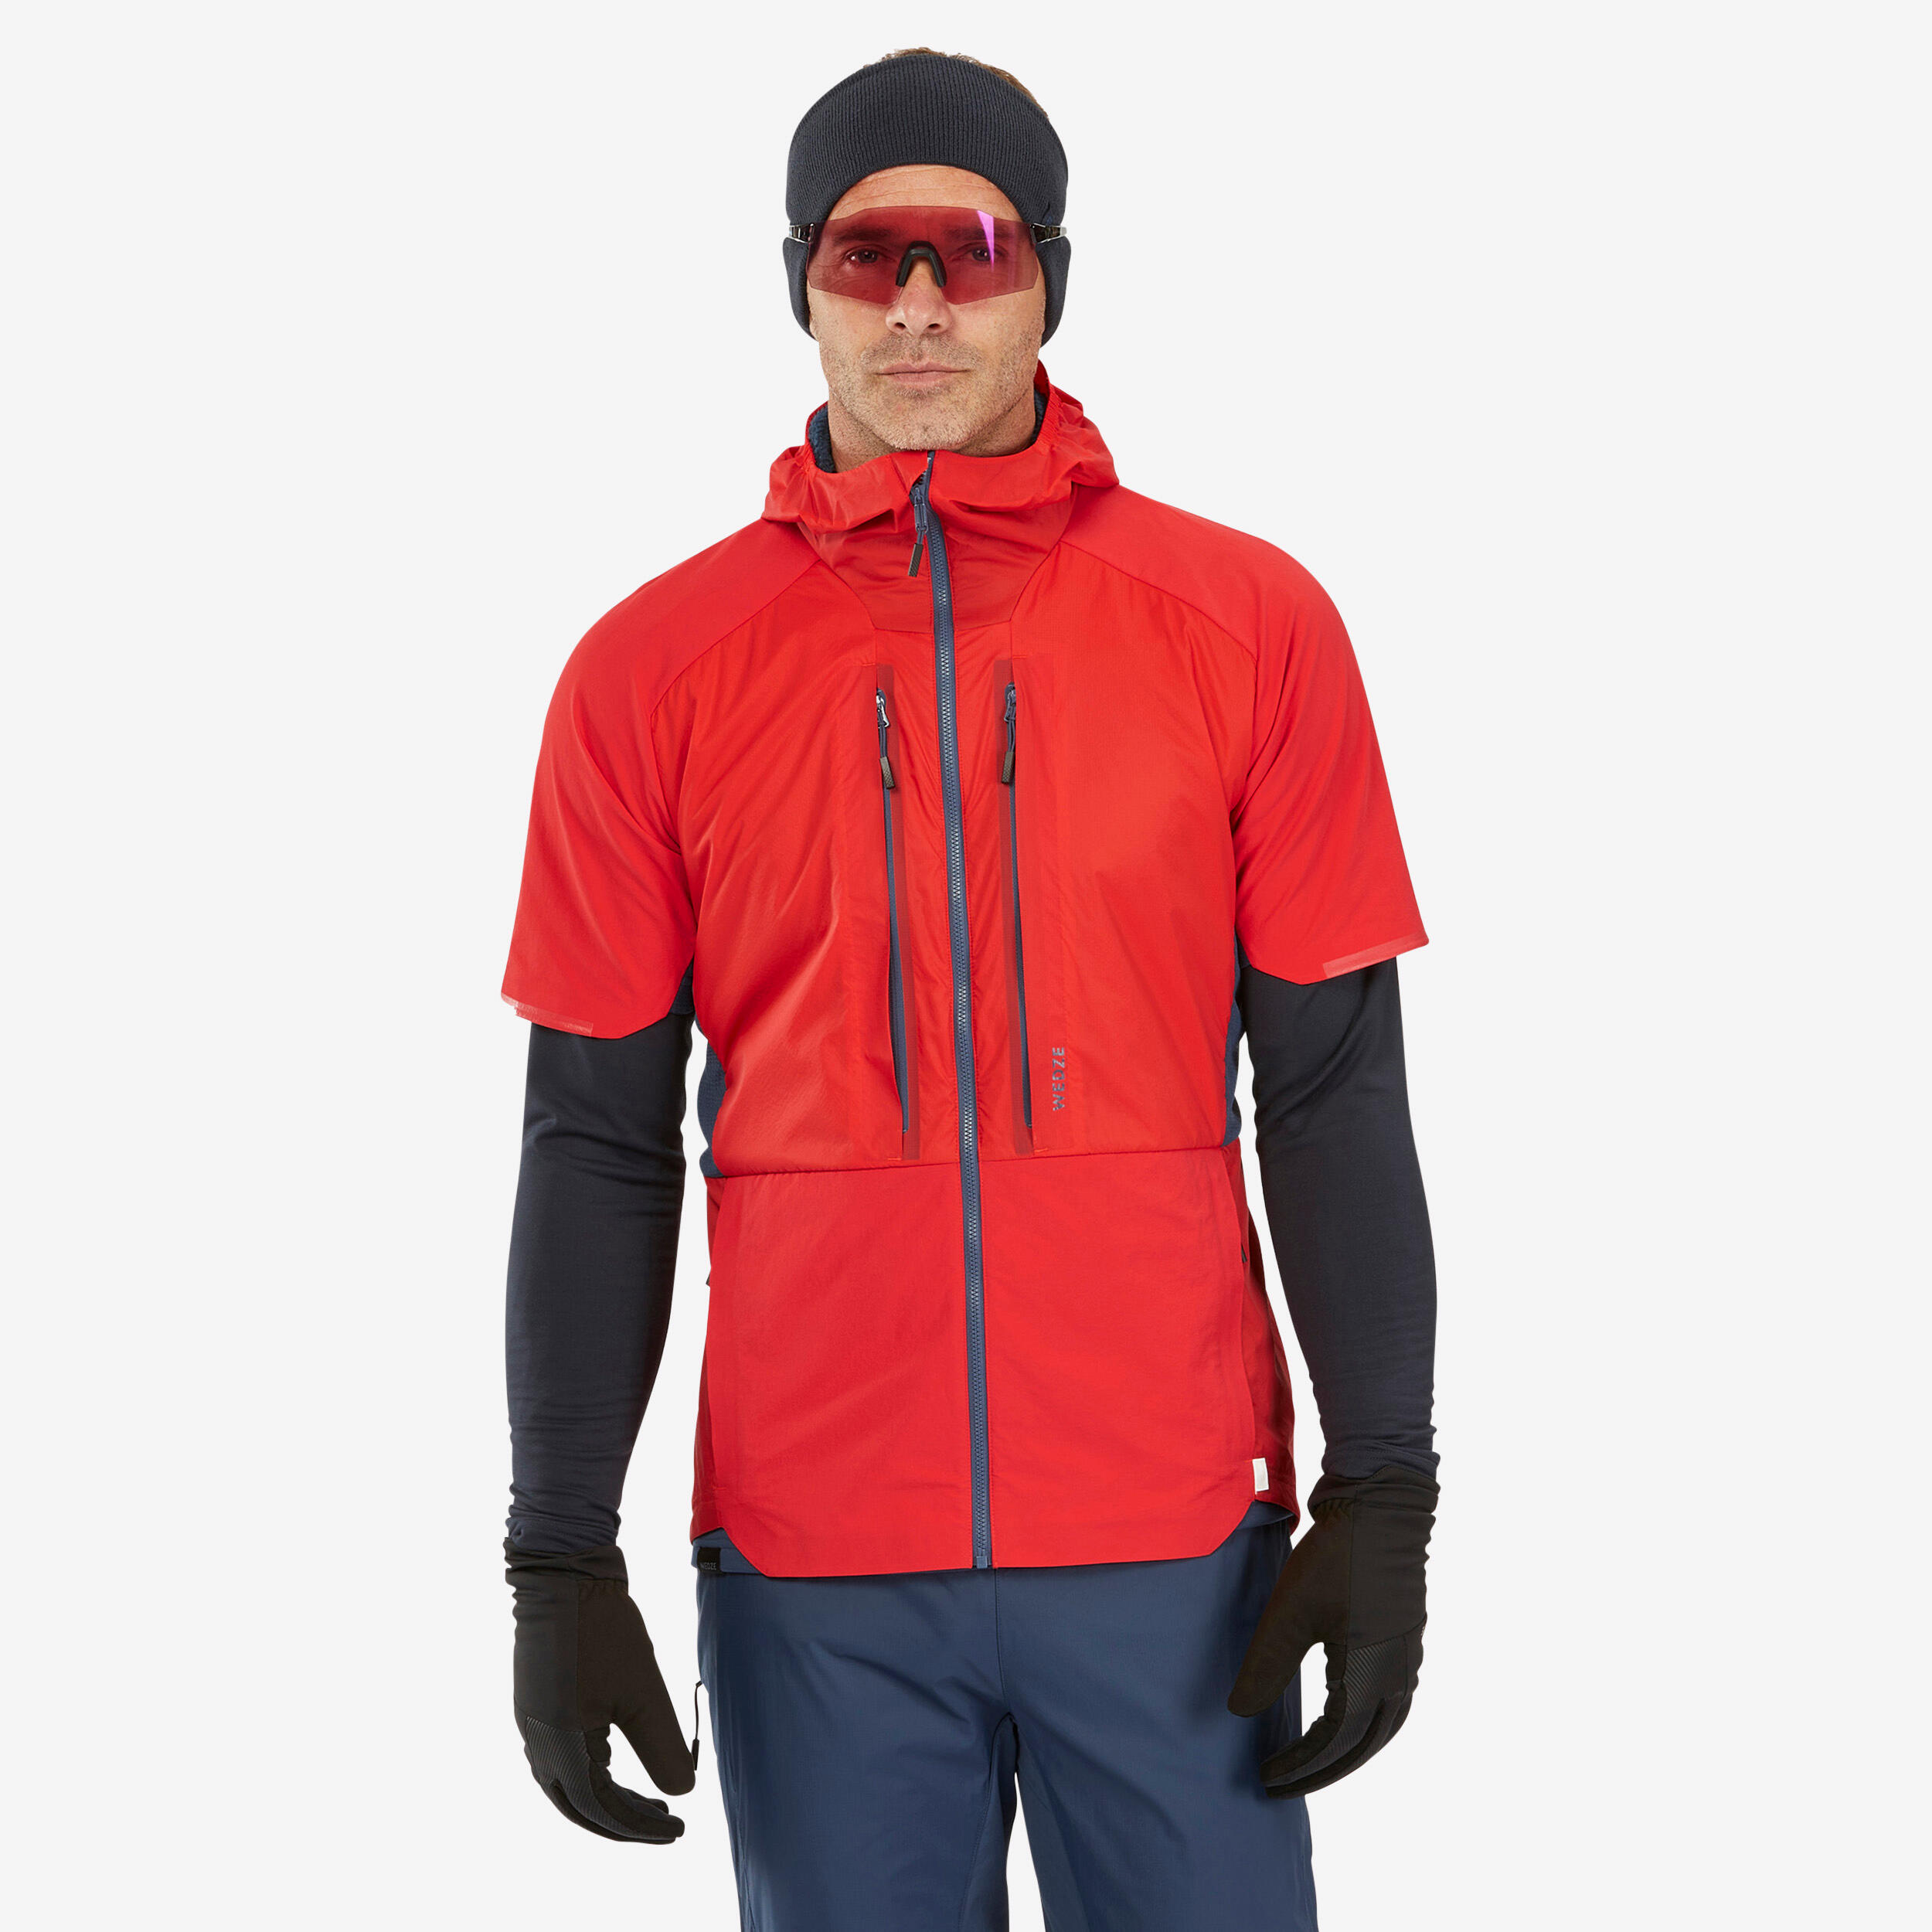 MEN'S PACER SHORT-SLEEVED CROSS COUNTRY SKI JACKET - RED AND NAVY BLUE 1/14